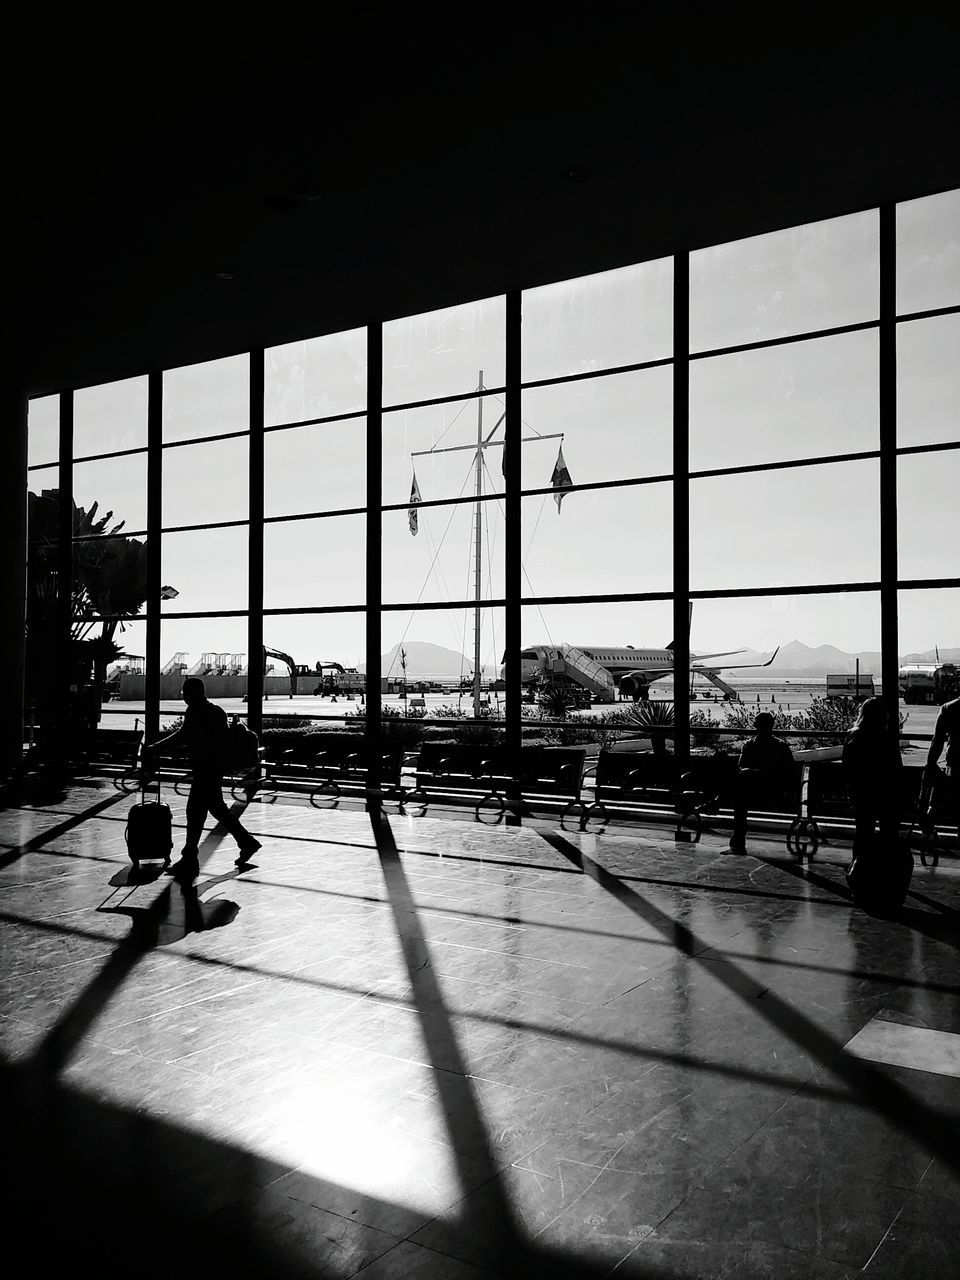 SILHOUETTE PEOPLE IN AIRPORT